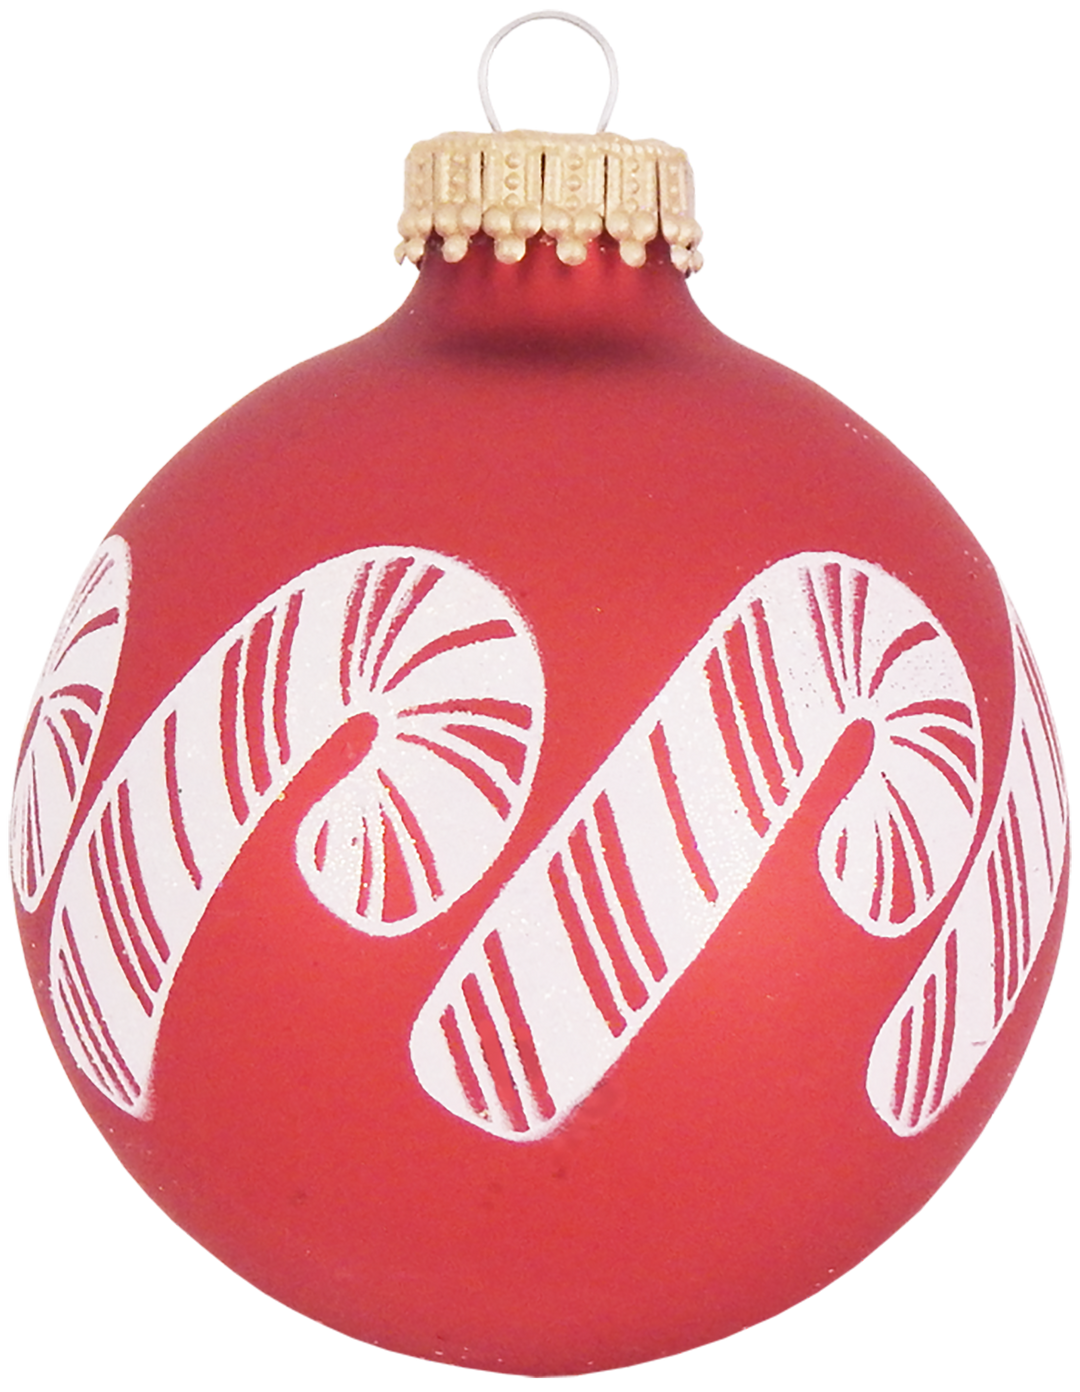 2 5/8" (67mm) Glass Ball Ornaments, Candy Apple Red / Flame Red with Standing Candy Canes, 4/Box, 12/Case, 48 Pieces